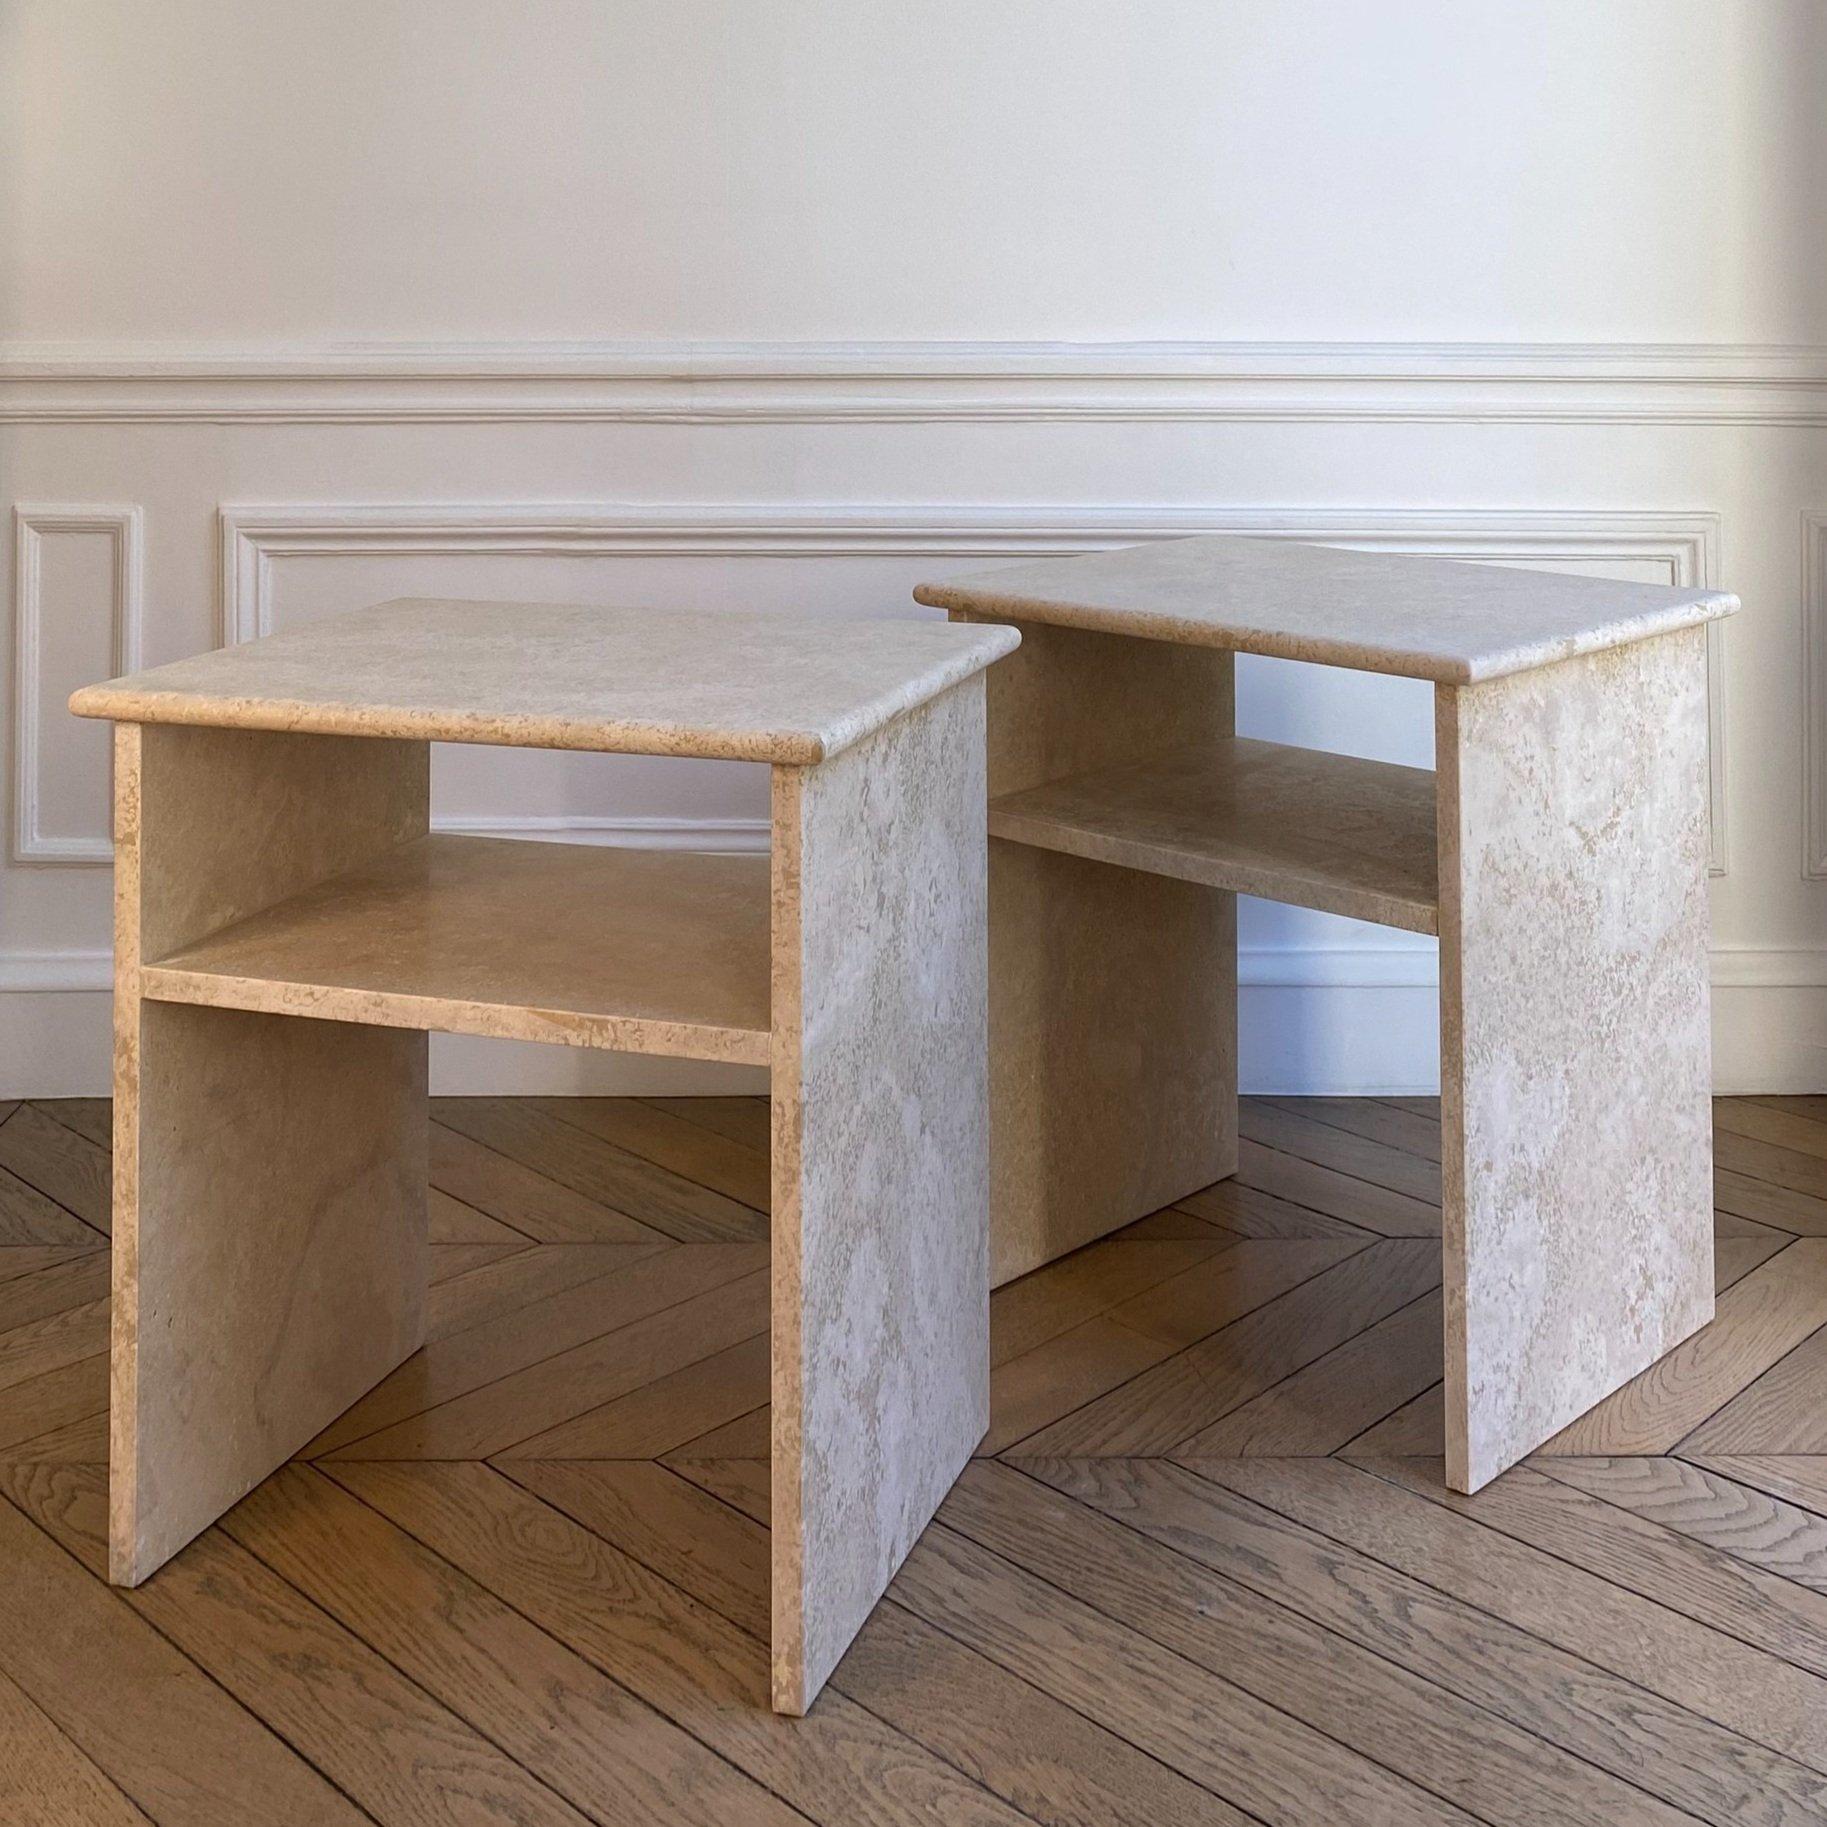 Set Of 2 Travertino Al Verso Bedside Tables by ALMARMO
Dimensions: D 40 x W 50 x H 55 cm. 
Materials: Travertino Al Verso marble.

Sold as a pair. Honed natural matte finish. Please contact us.

Featuring considered dimensions and a shelf for added